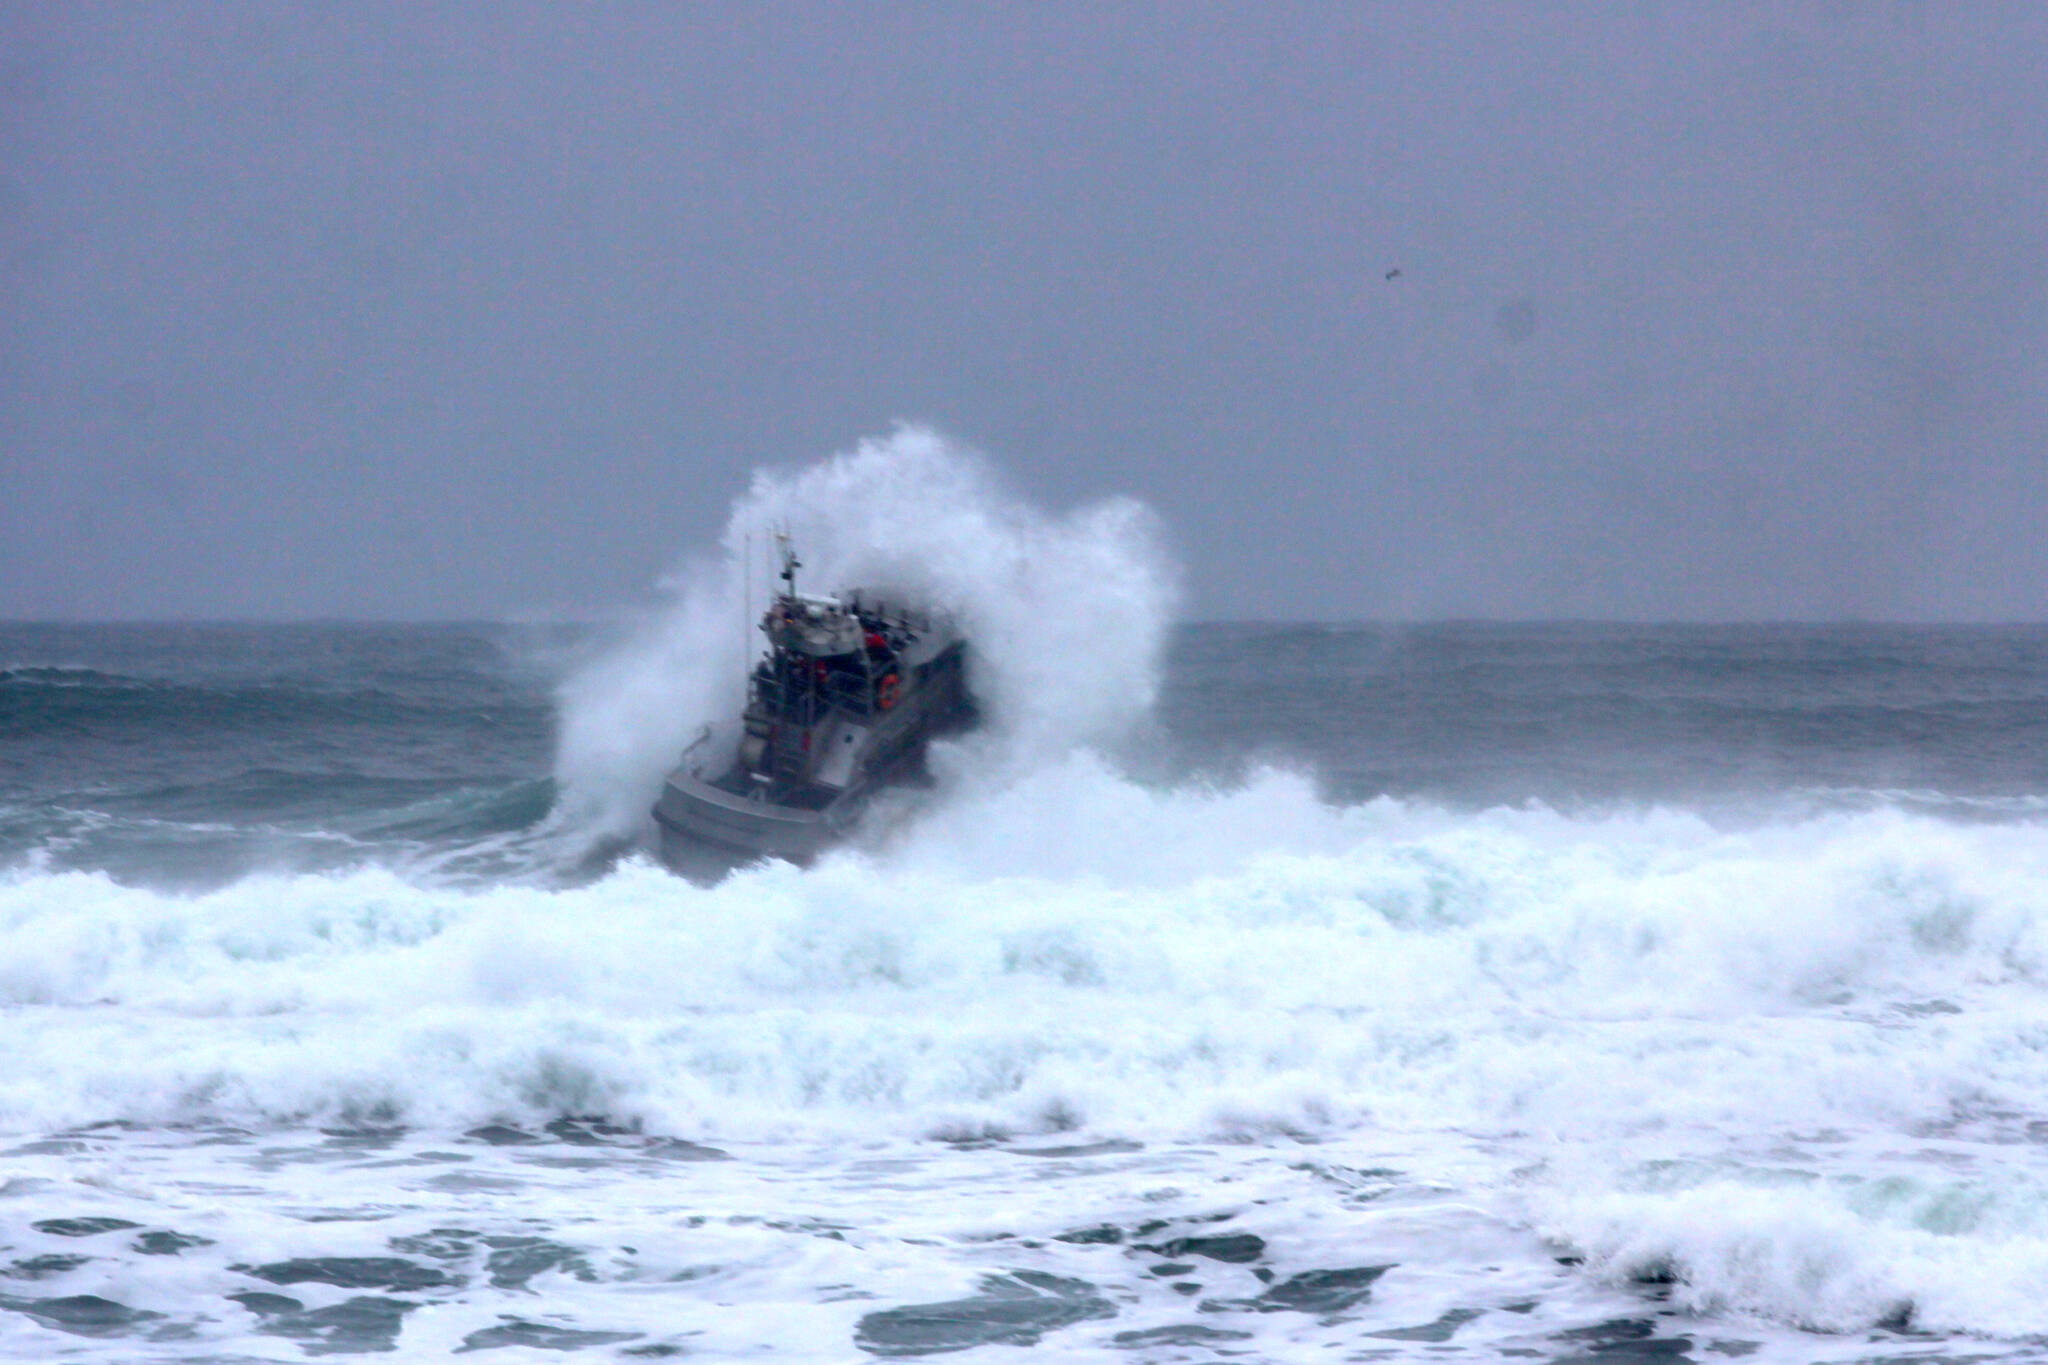 U.S. Coast Guard rescue vessels from Station Grays Harbor practice operating in heavy surf conditions on Dec. 9, 2022. (Michael S. Lockett / The Daily World)